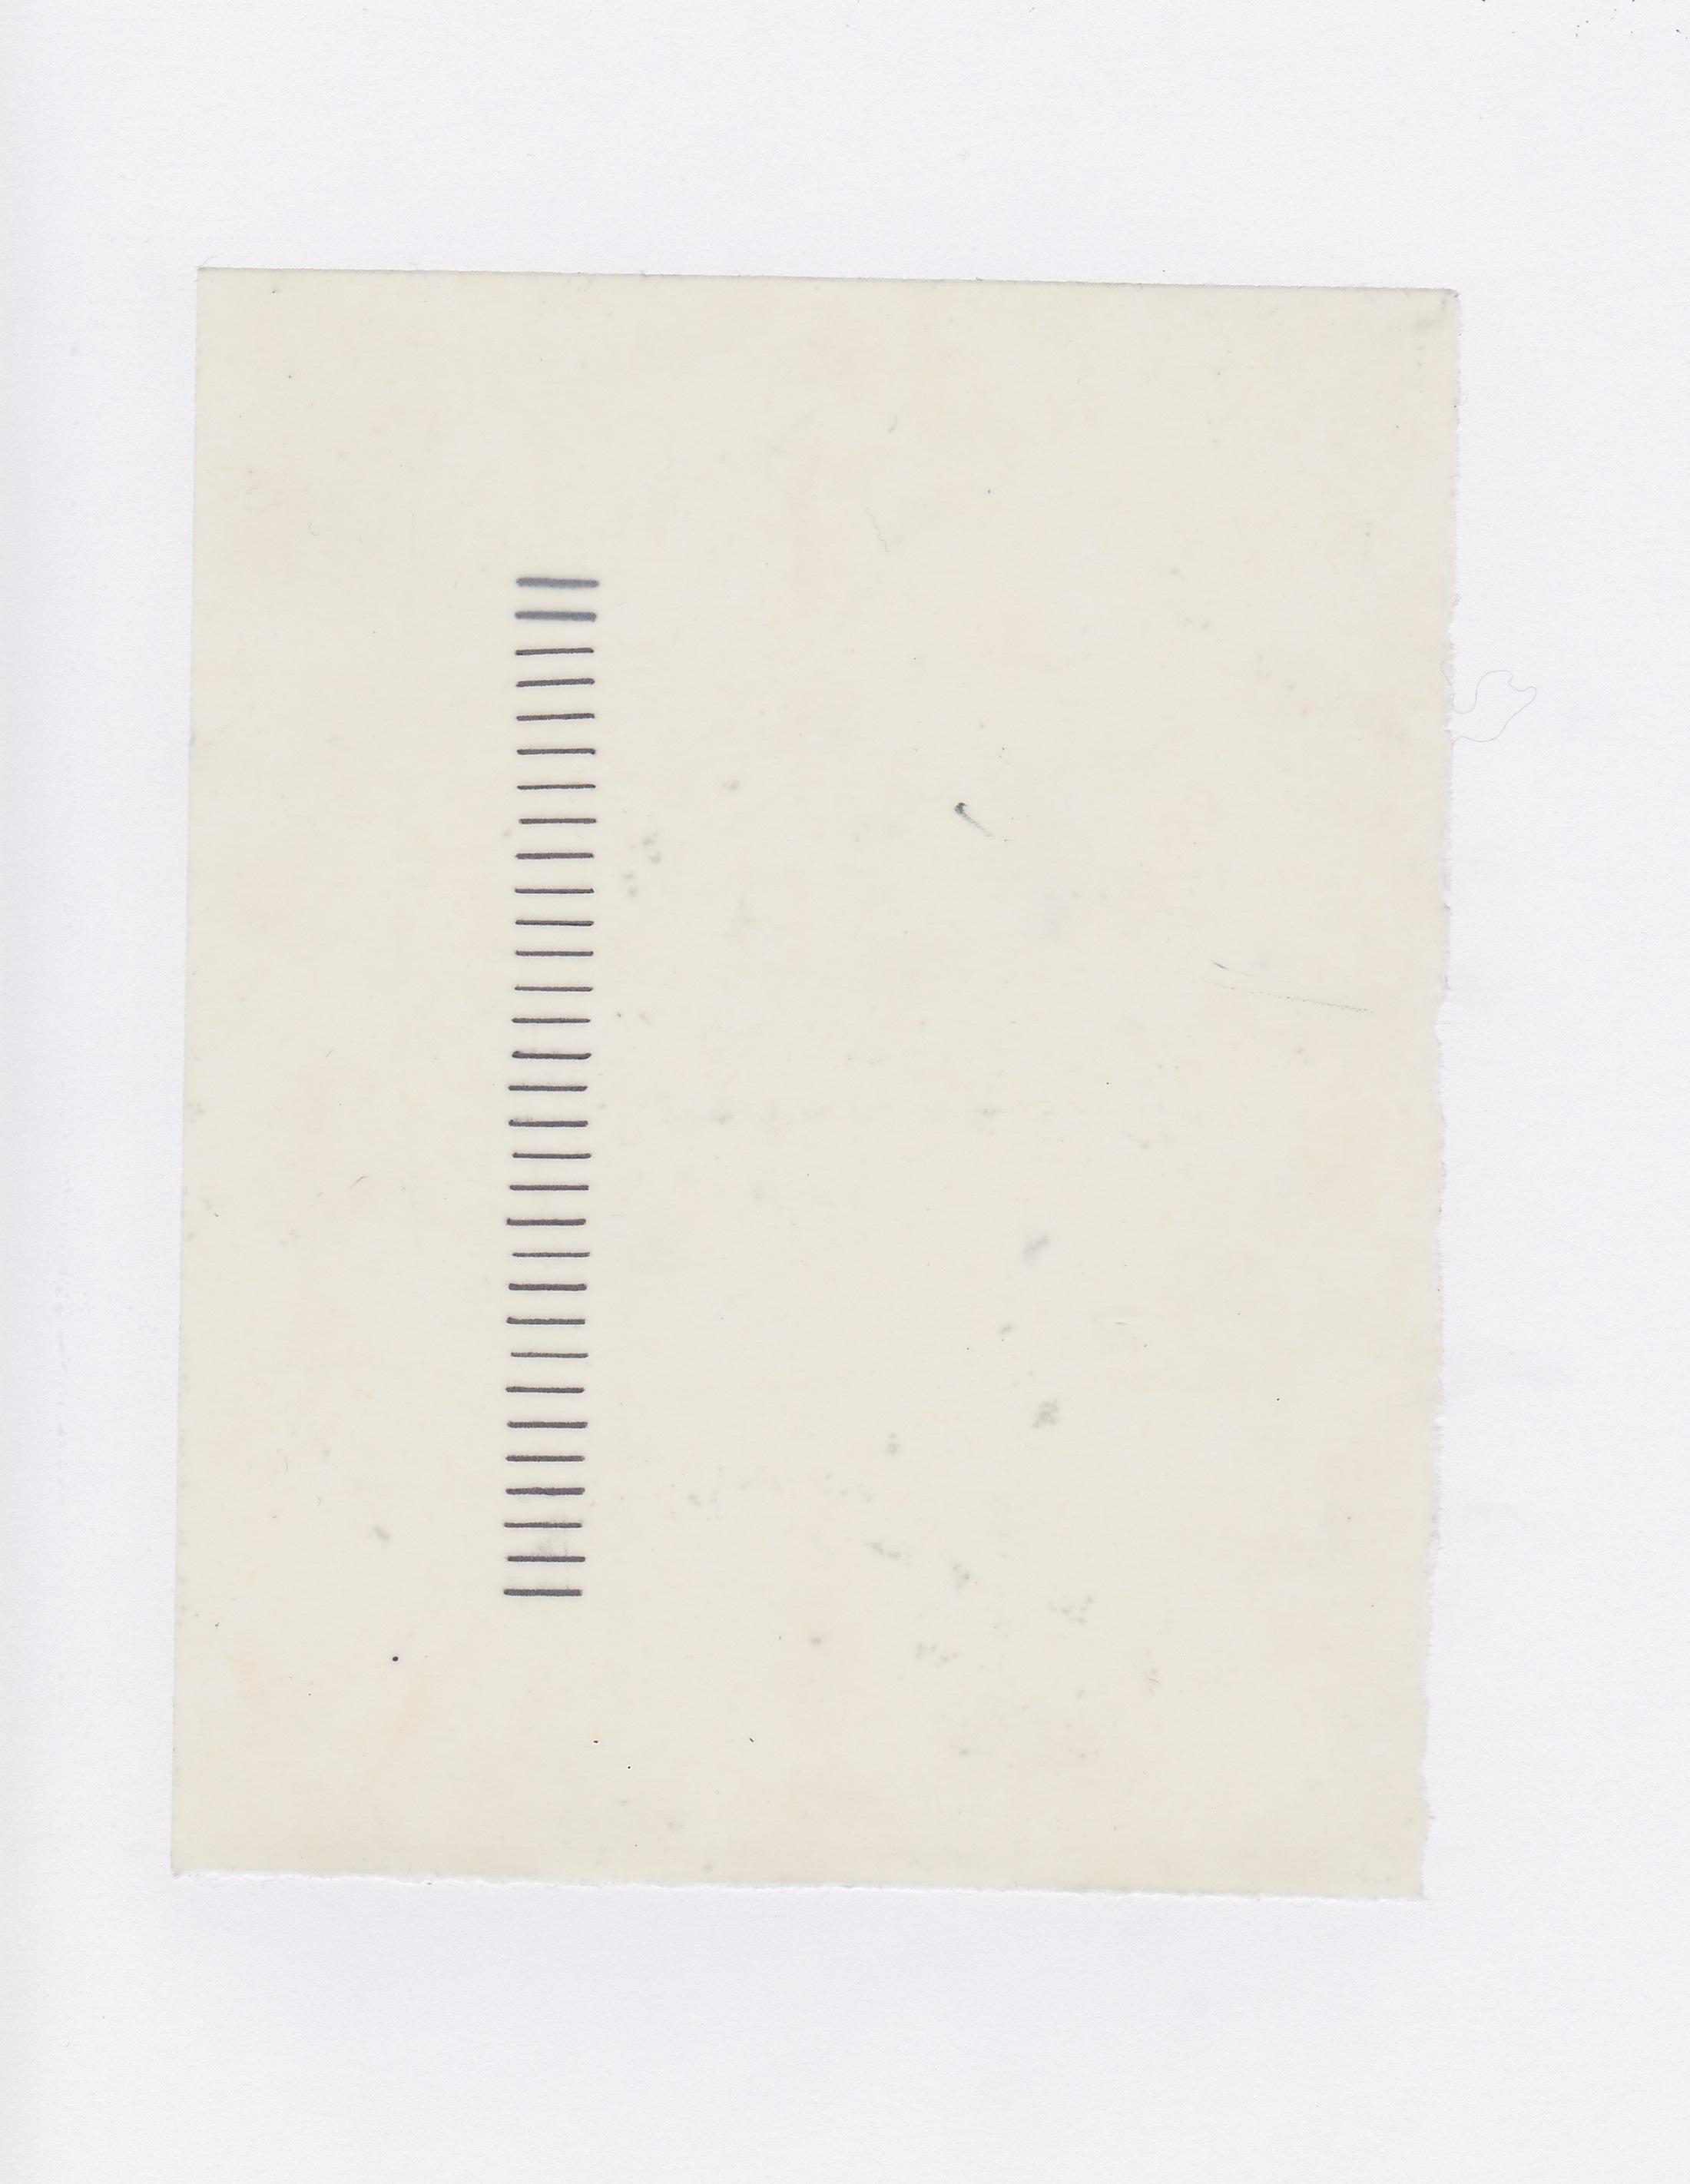 Untitled (the city, observations 16B)  Pencil on layered(x2) oiled fabriano paper.  140mm x 180mm  December 2013